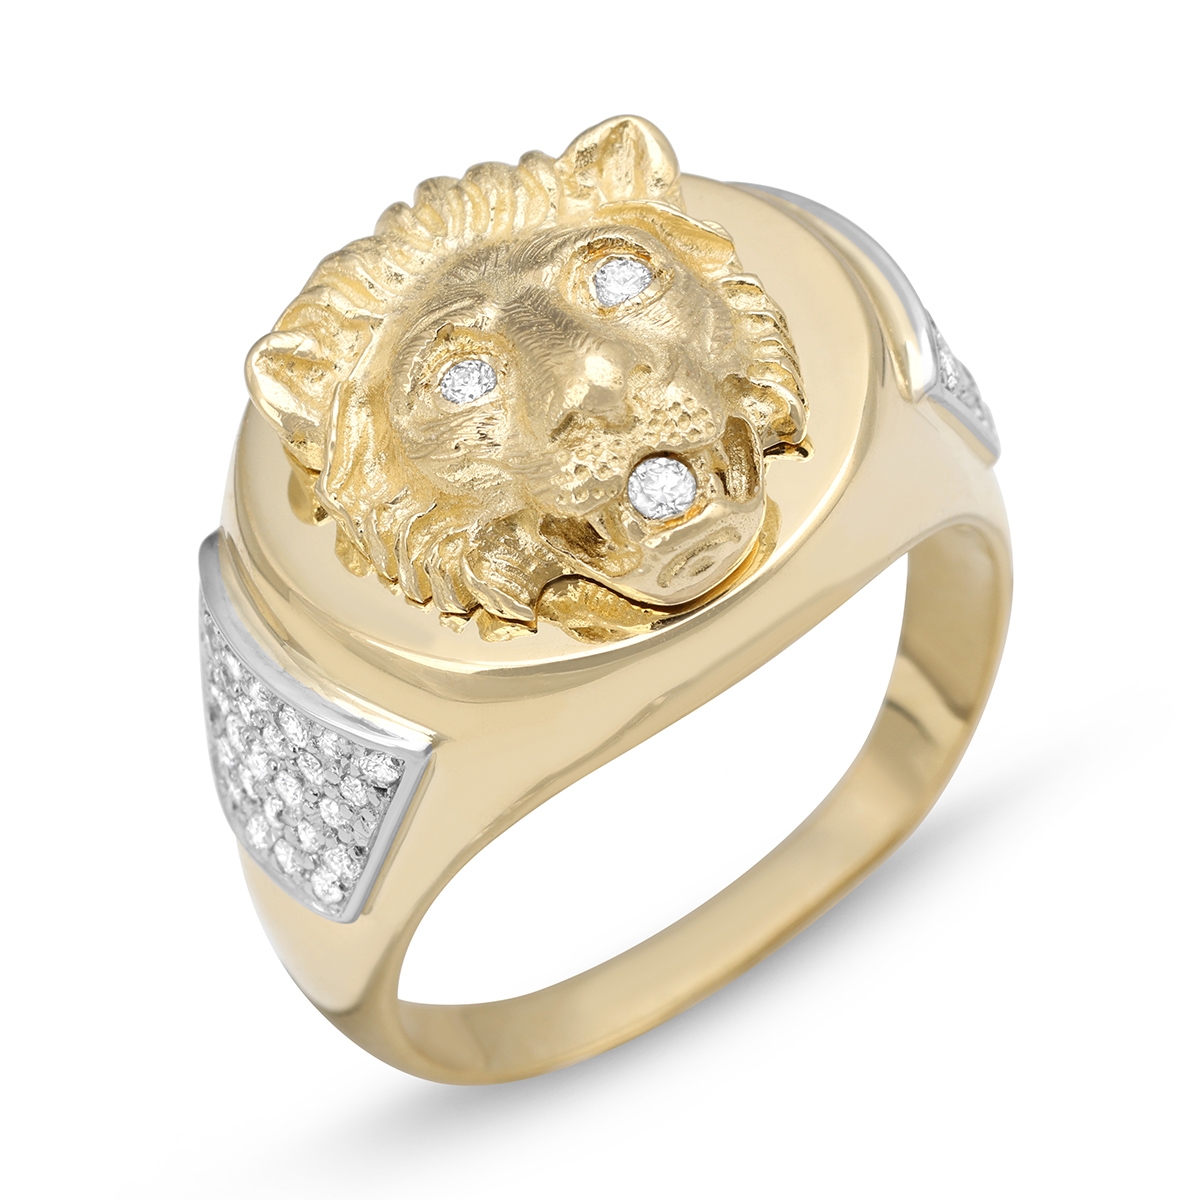 Majestic Lion of Judah 14K Gold Men's Ring With Diamond Accent (Choice of Colors) - 1